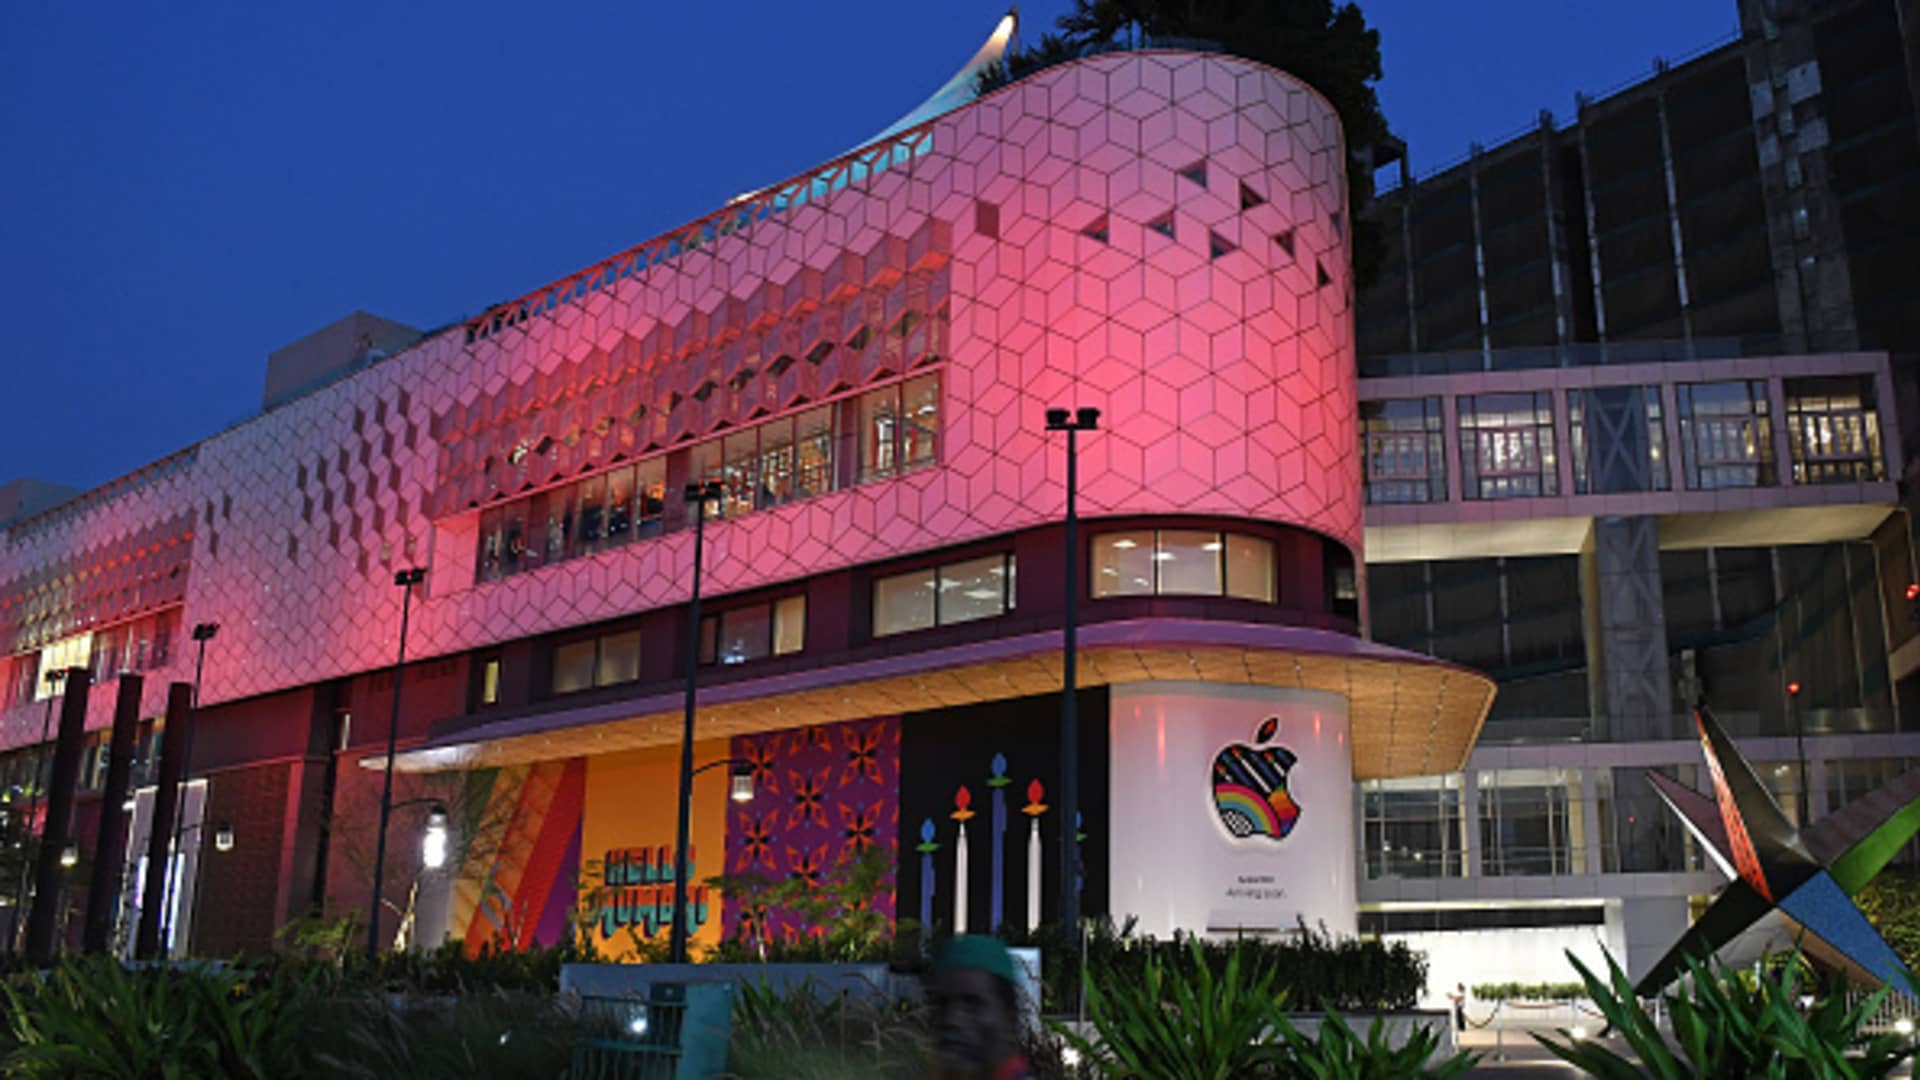 As it seeks to attract a new generation of iPhone users, Apple opens its first location in India.